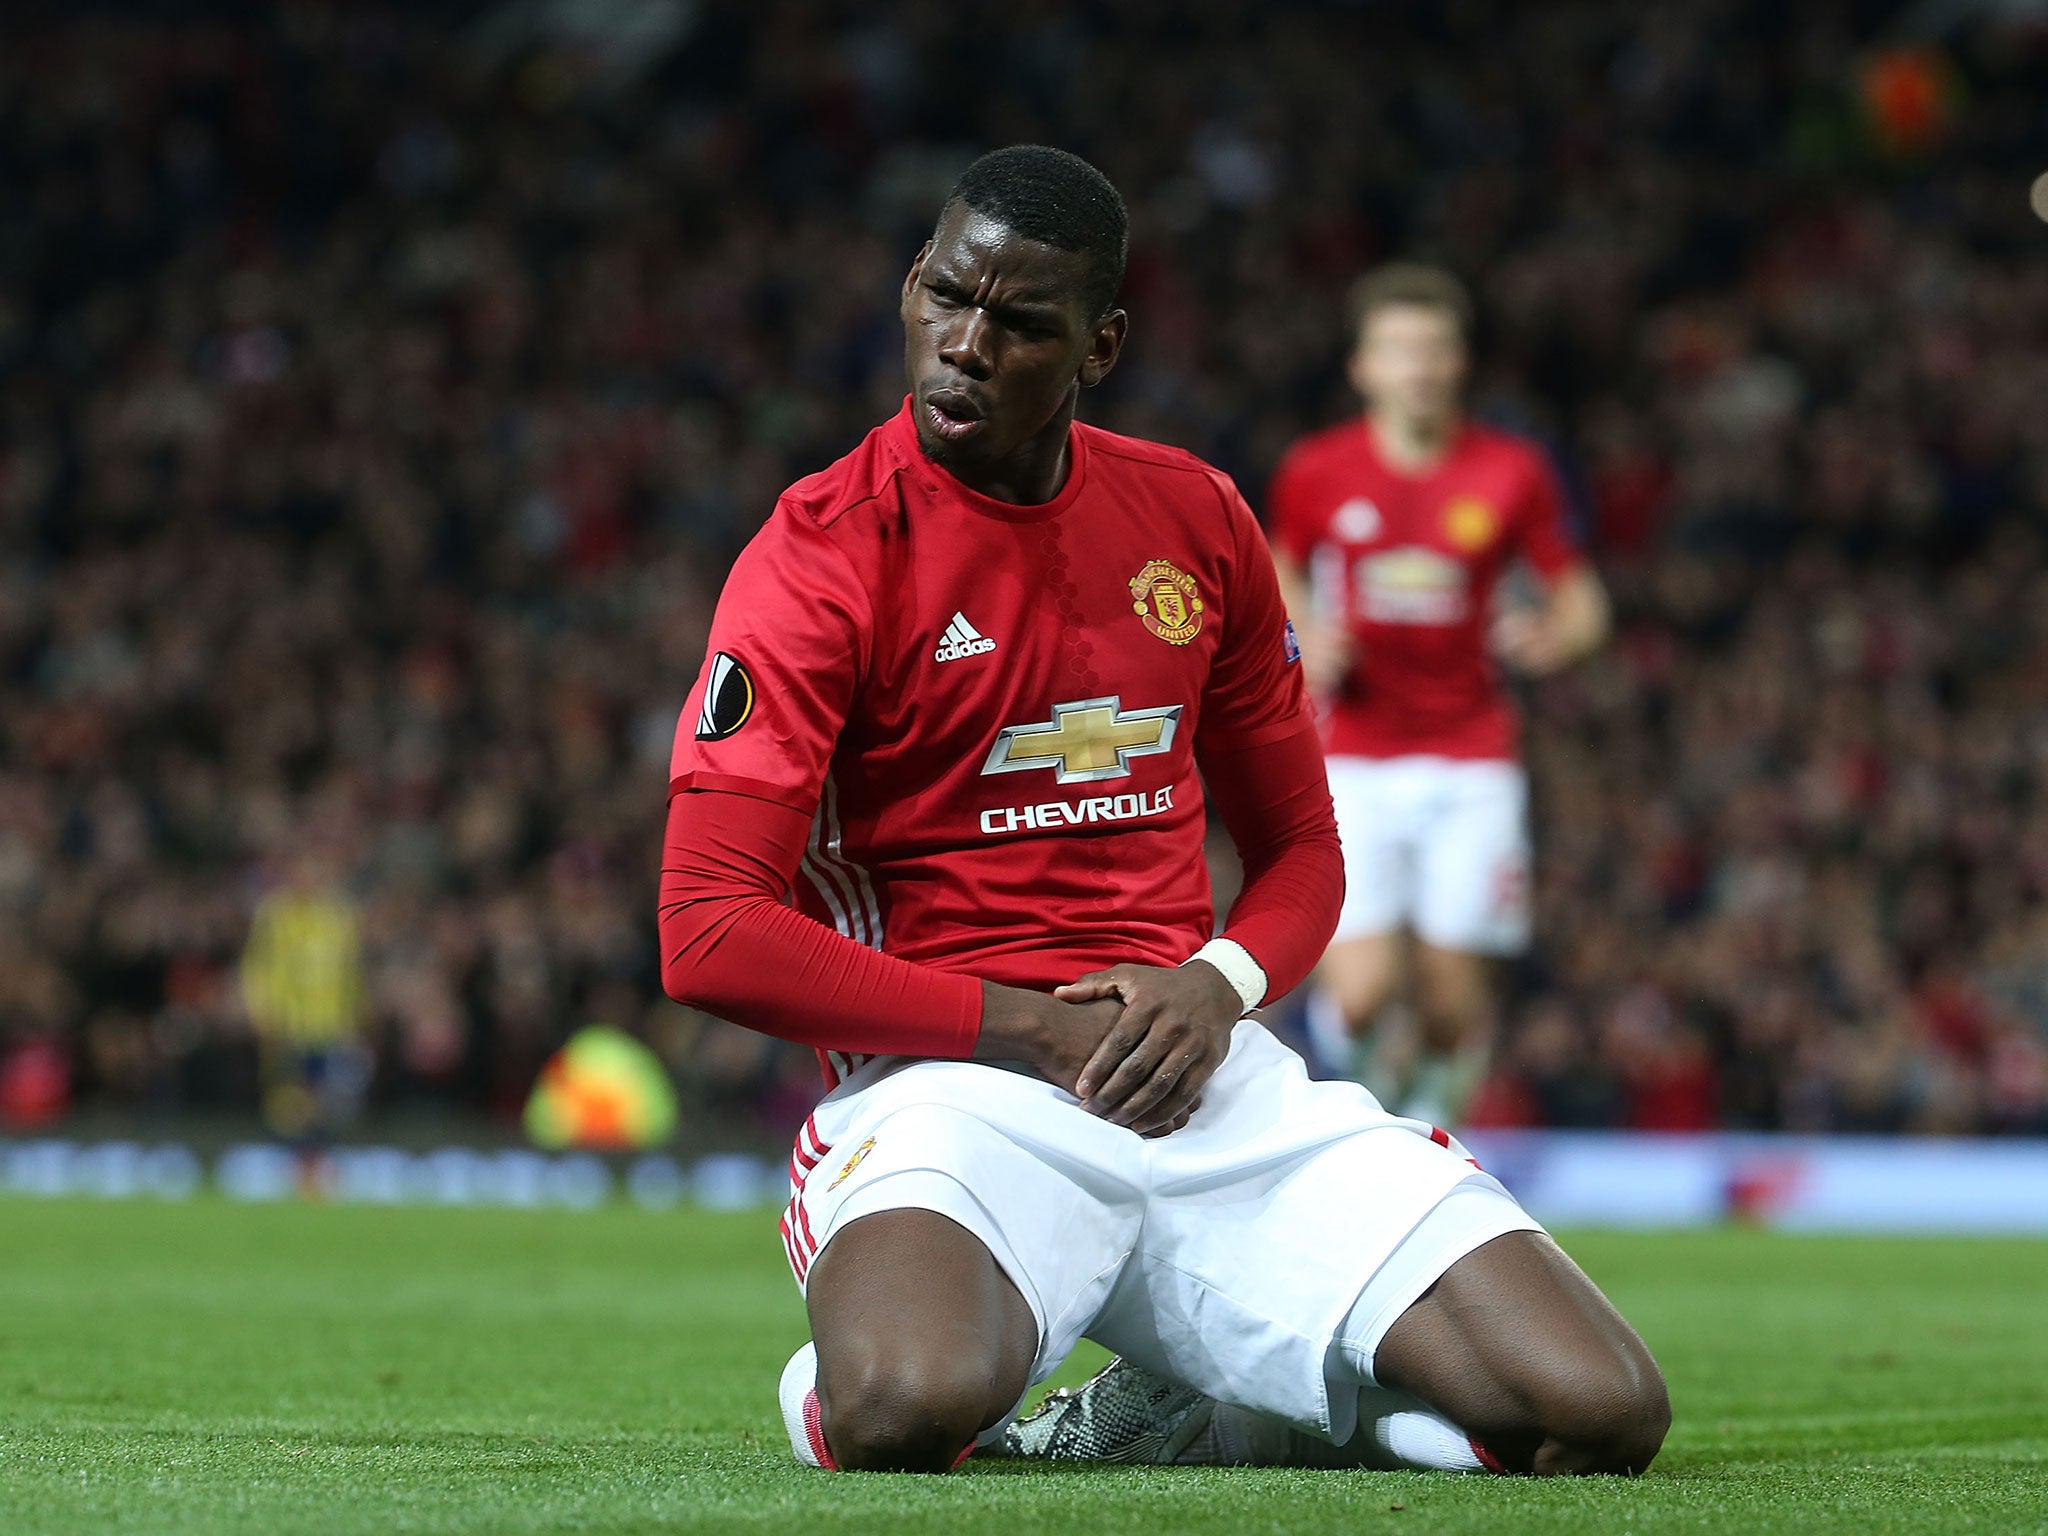 Pogba bagged a brace in United's comfortable win over the Turkish side